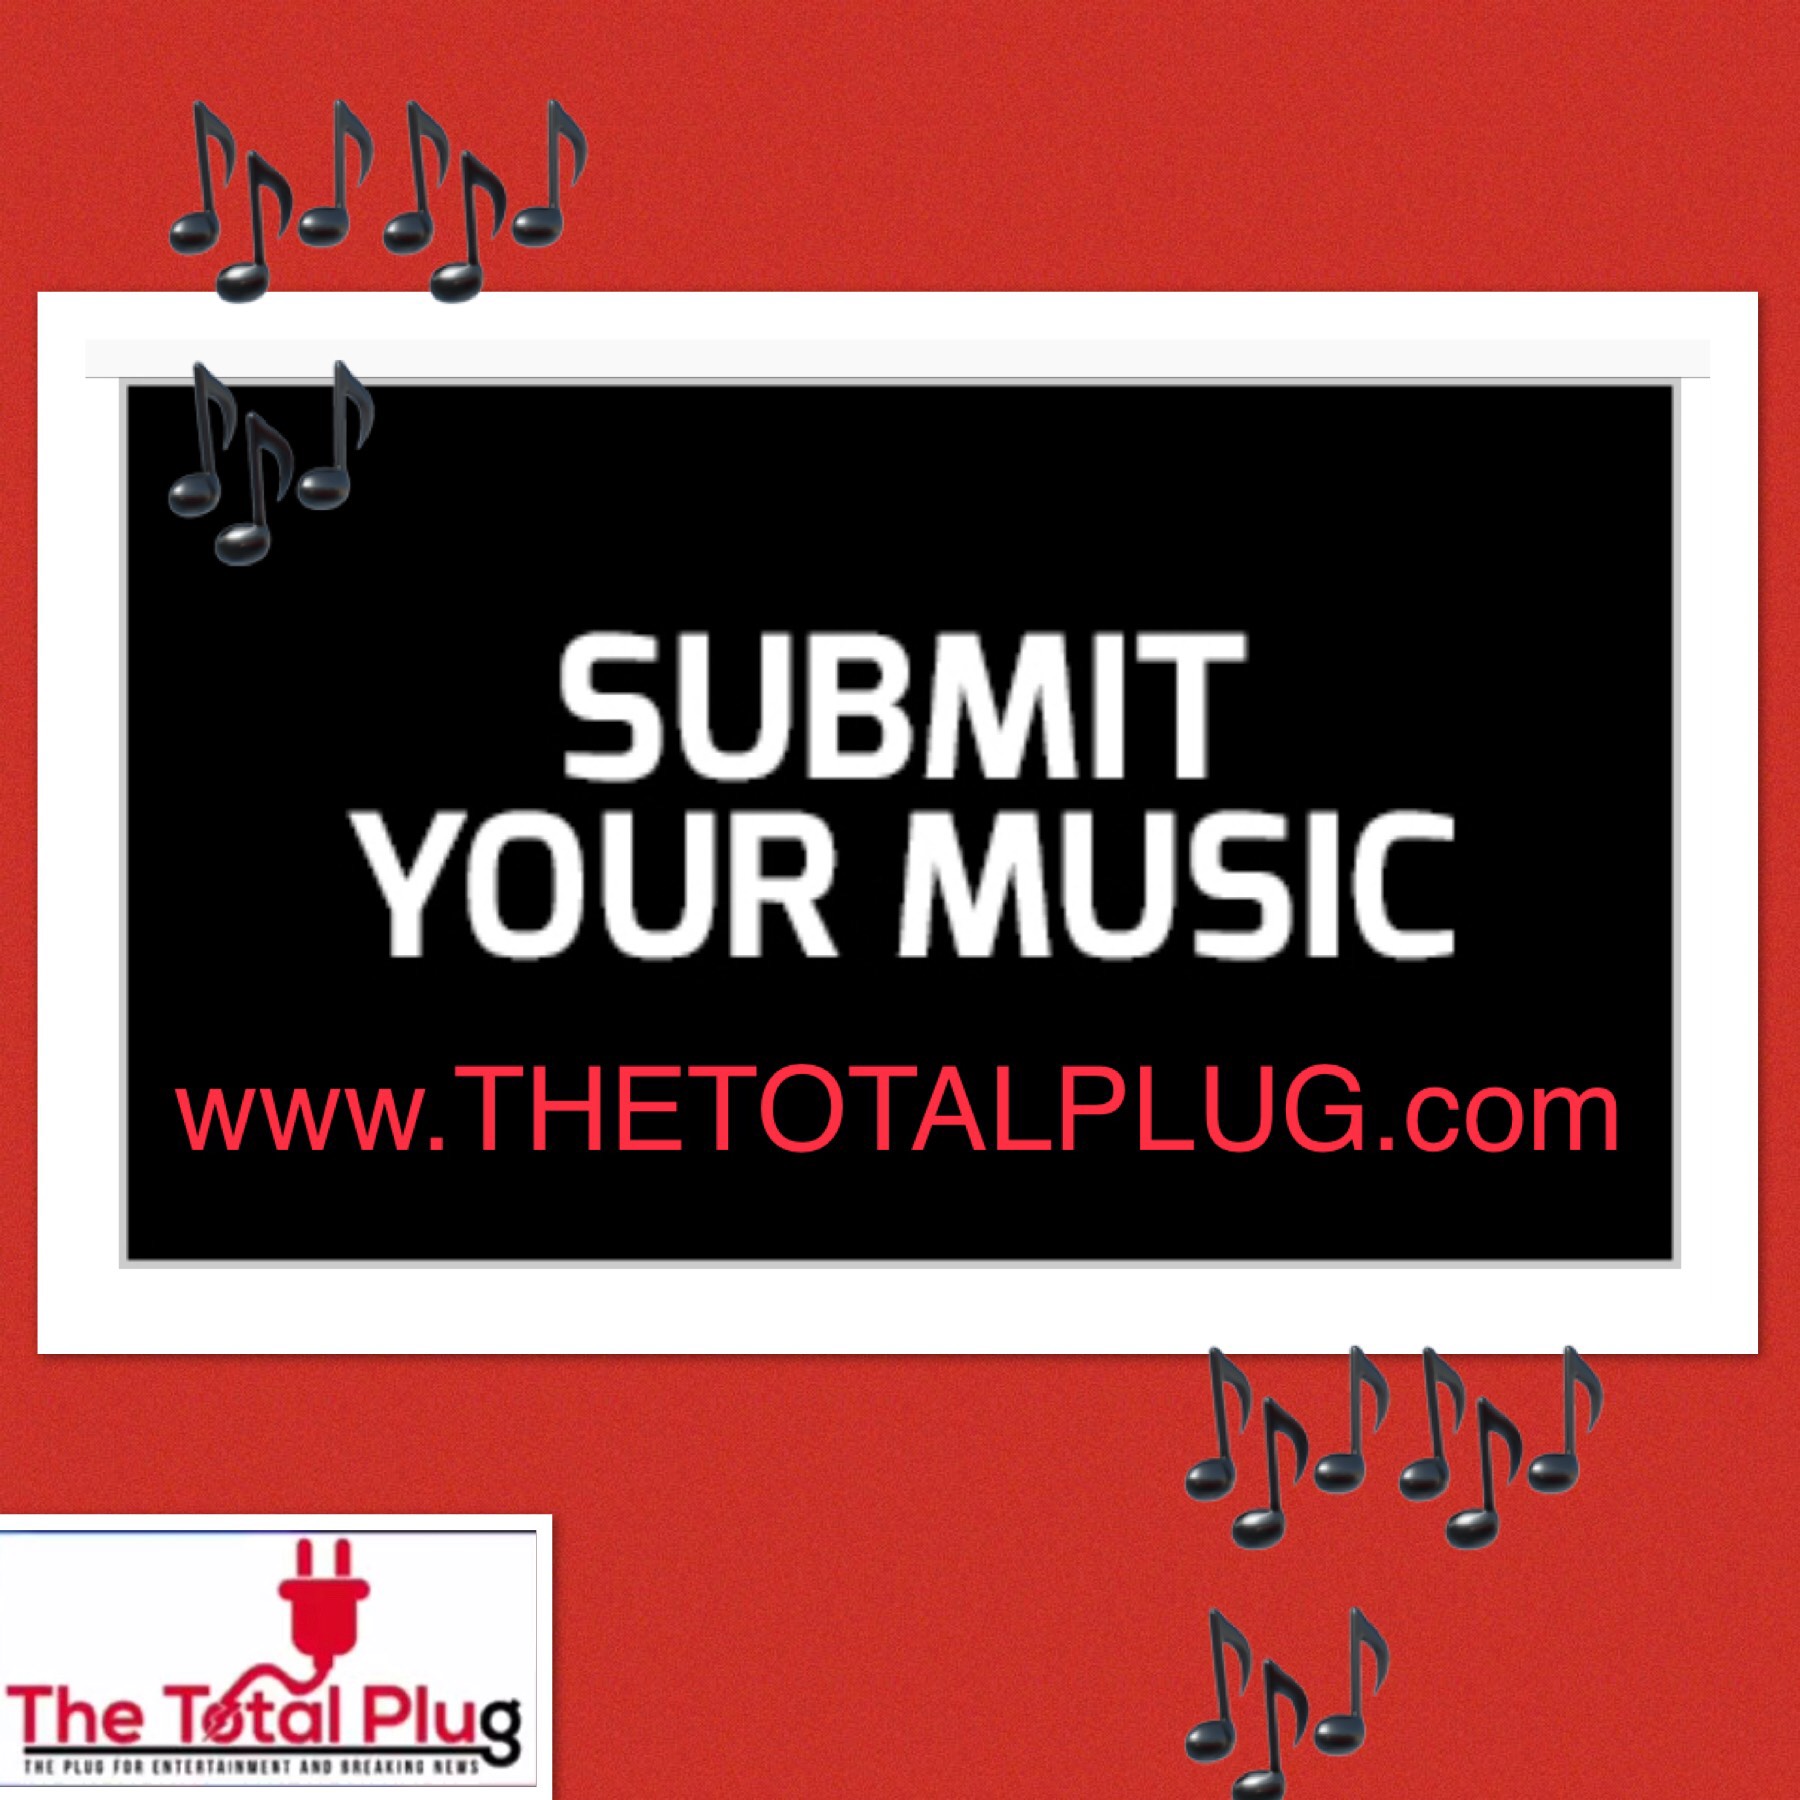 Follow us on here and on IG and any social media @thetotalplug for entertainment and breaking news! 